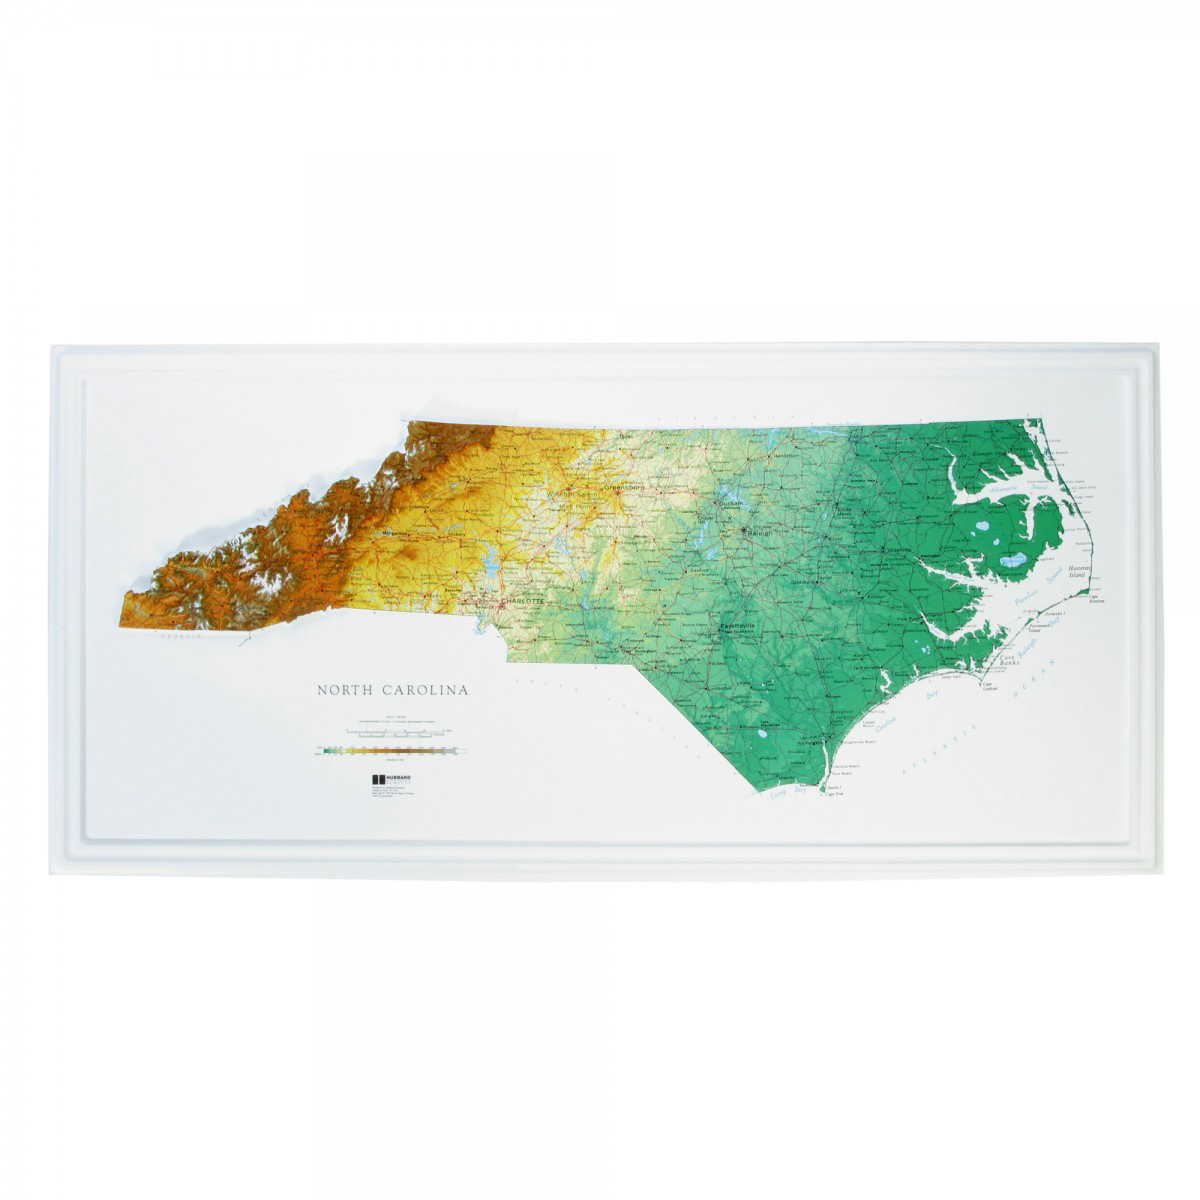 Picture of TestPlay 3075 39.5 x 18.5 in. North Carolina State Raised Relief Map, Unframed - Large